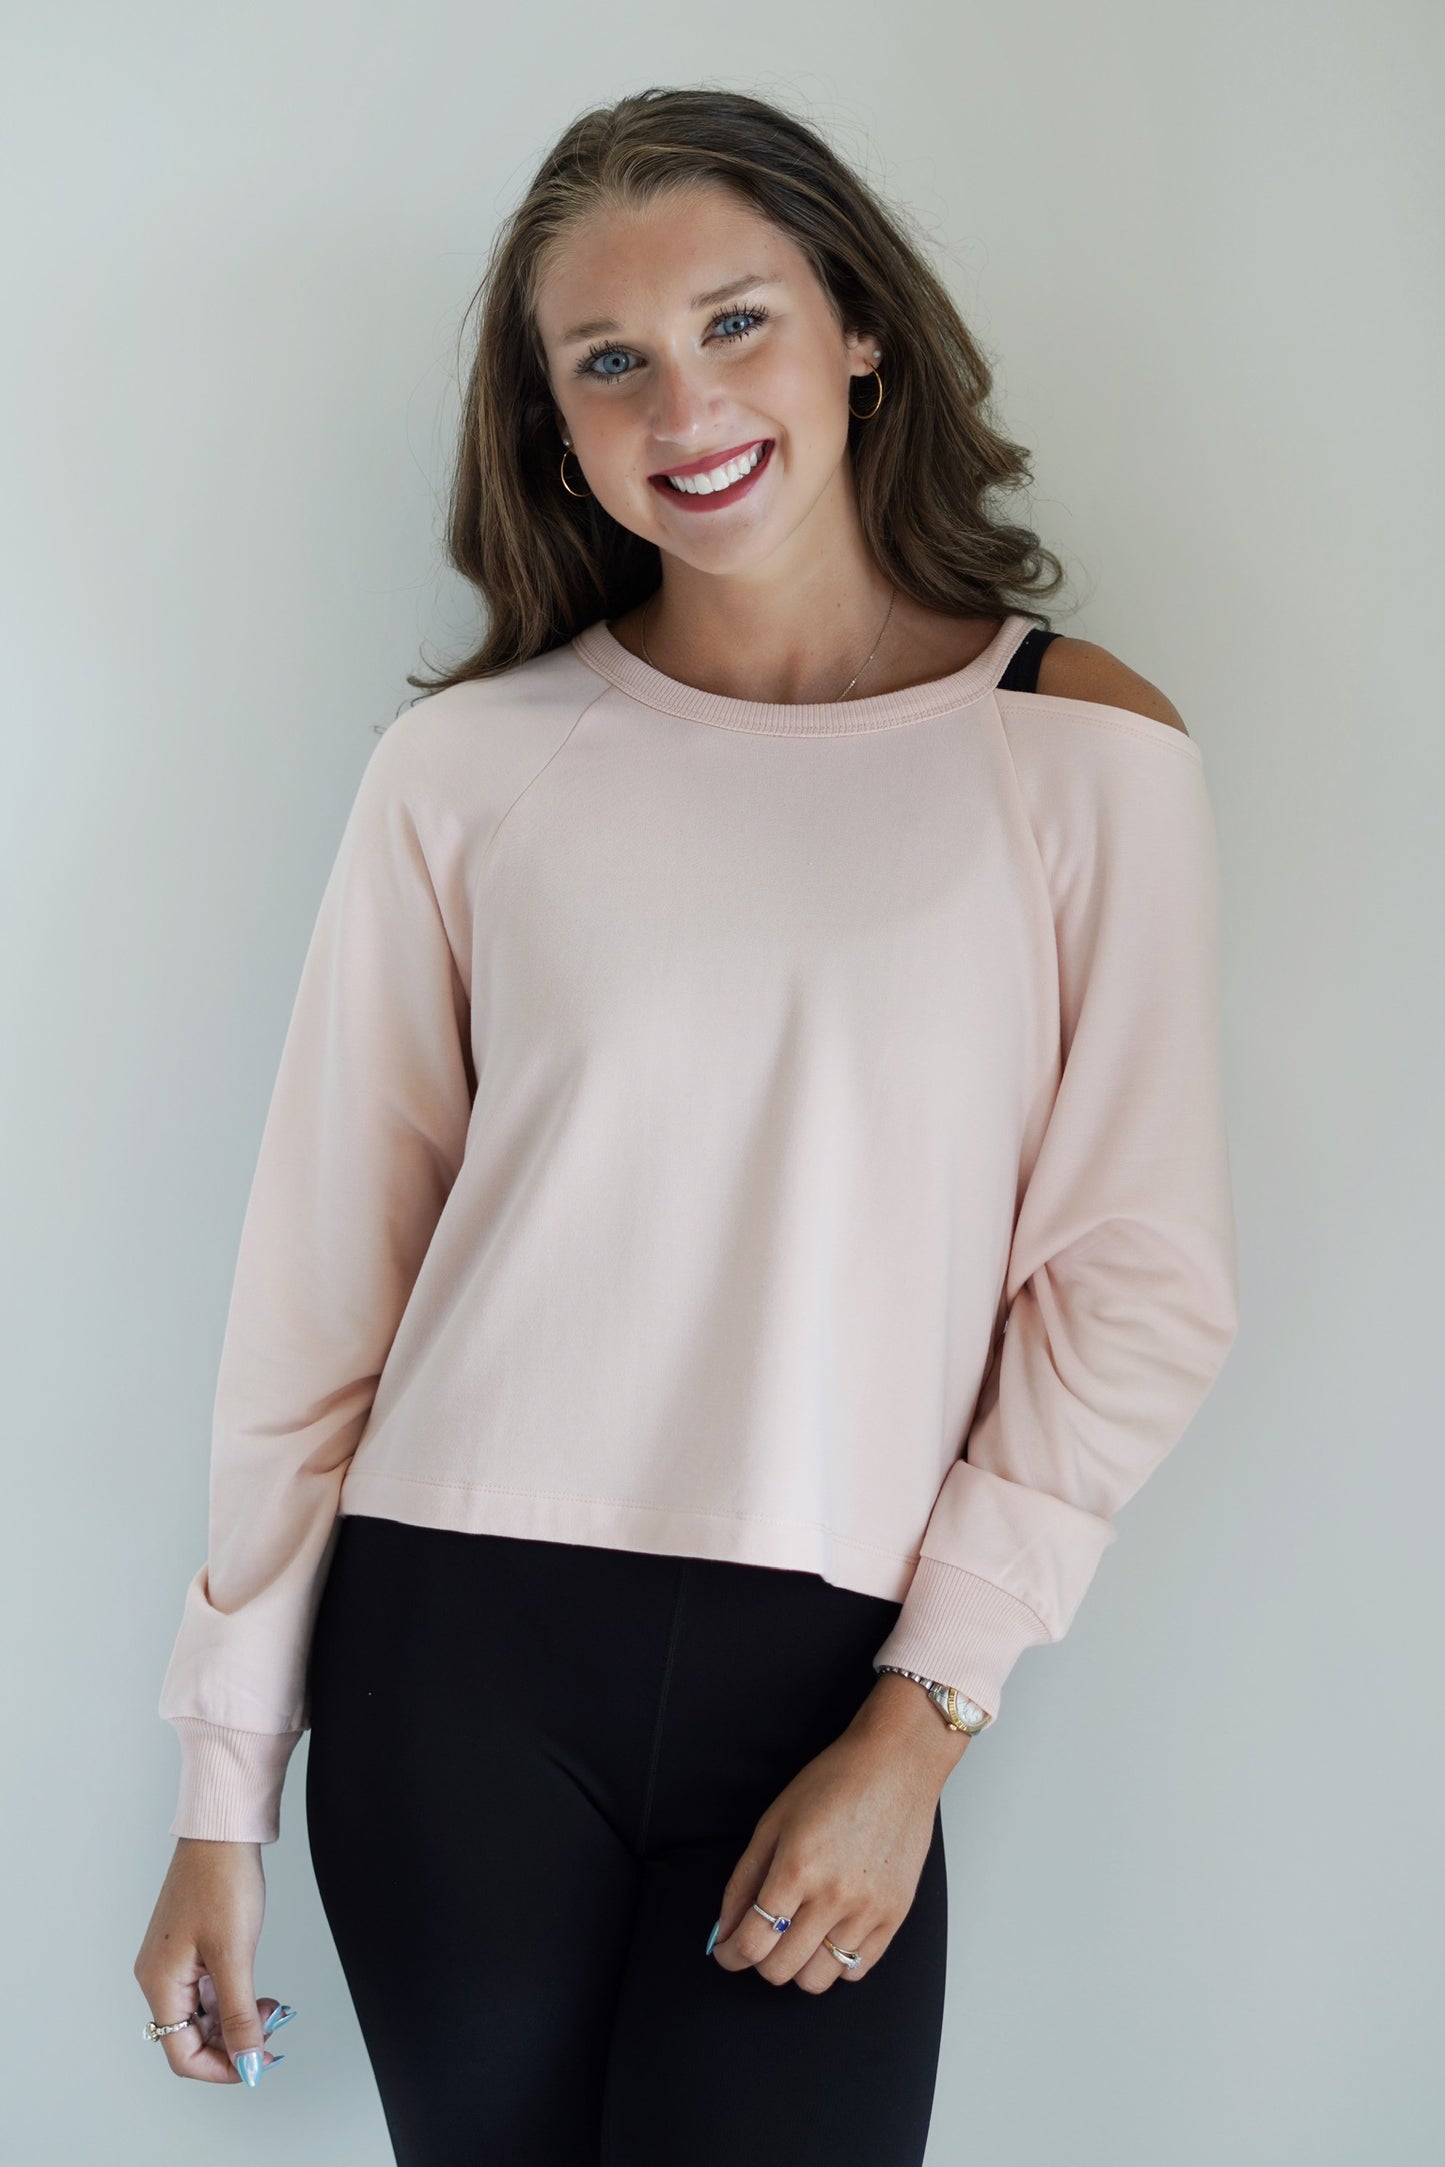 Savy Studio Modal Sweatshirt Crew Neckline Long Cuffed Sleeves Open Cold Shoulder Between the Crew Neckline and the Start of the Sleeve Rose Quartz Color Relaxed Fit Skimmer Length 97% Modal 3% Spandex